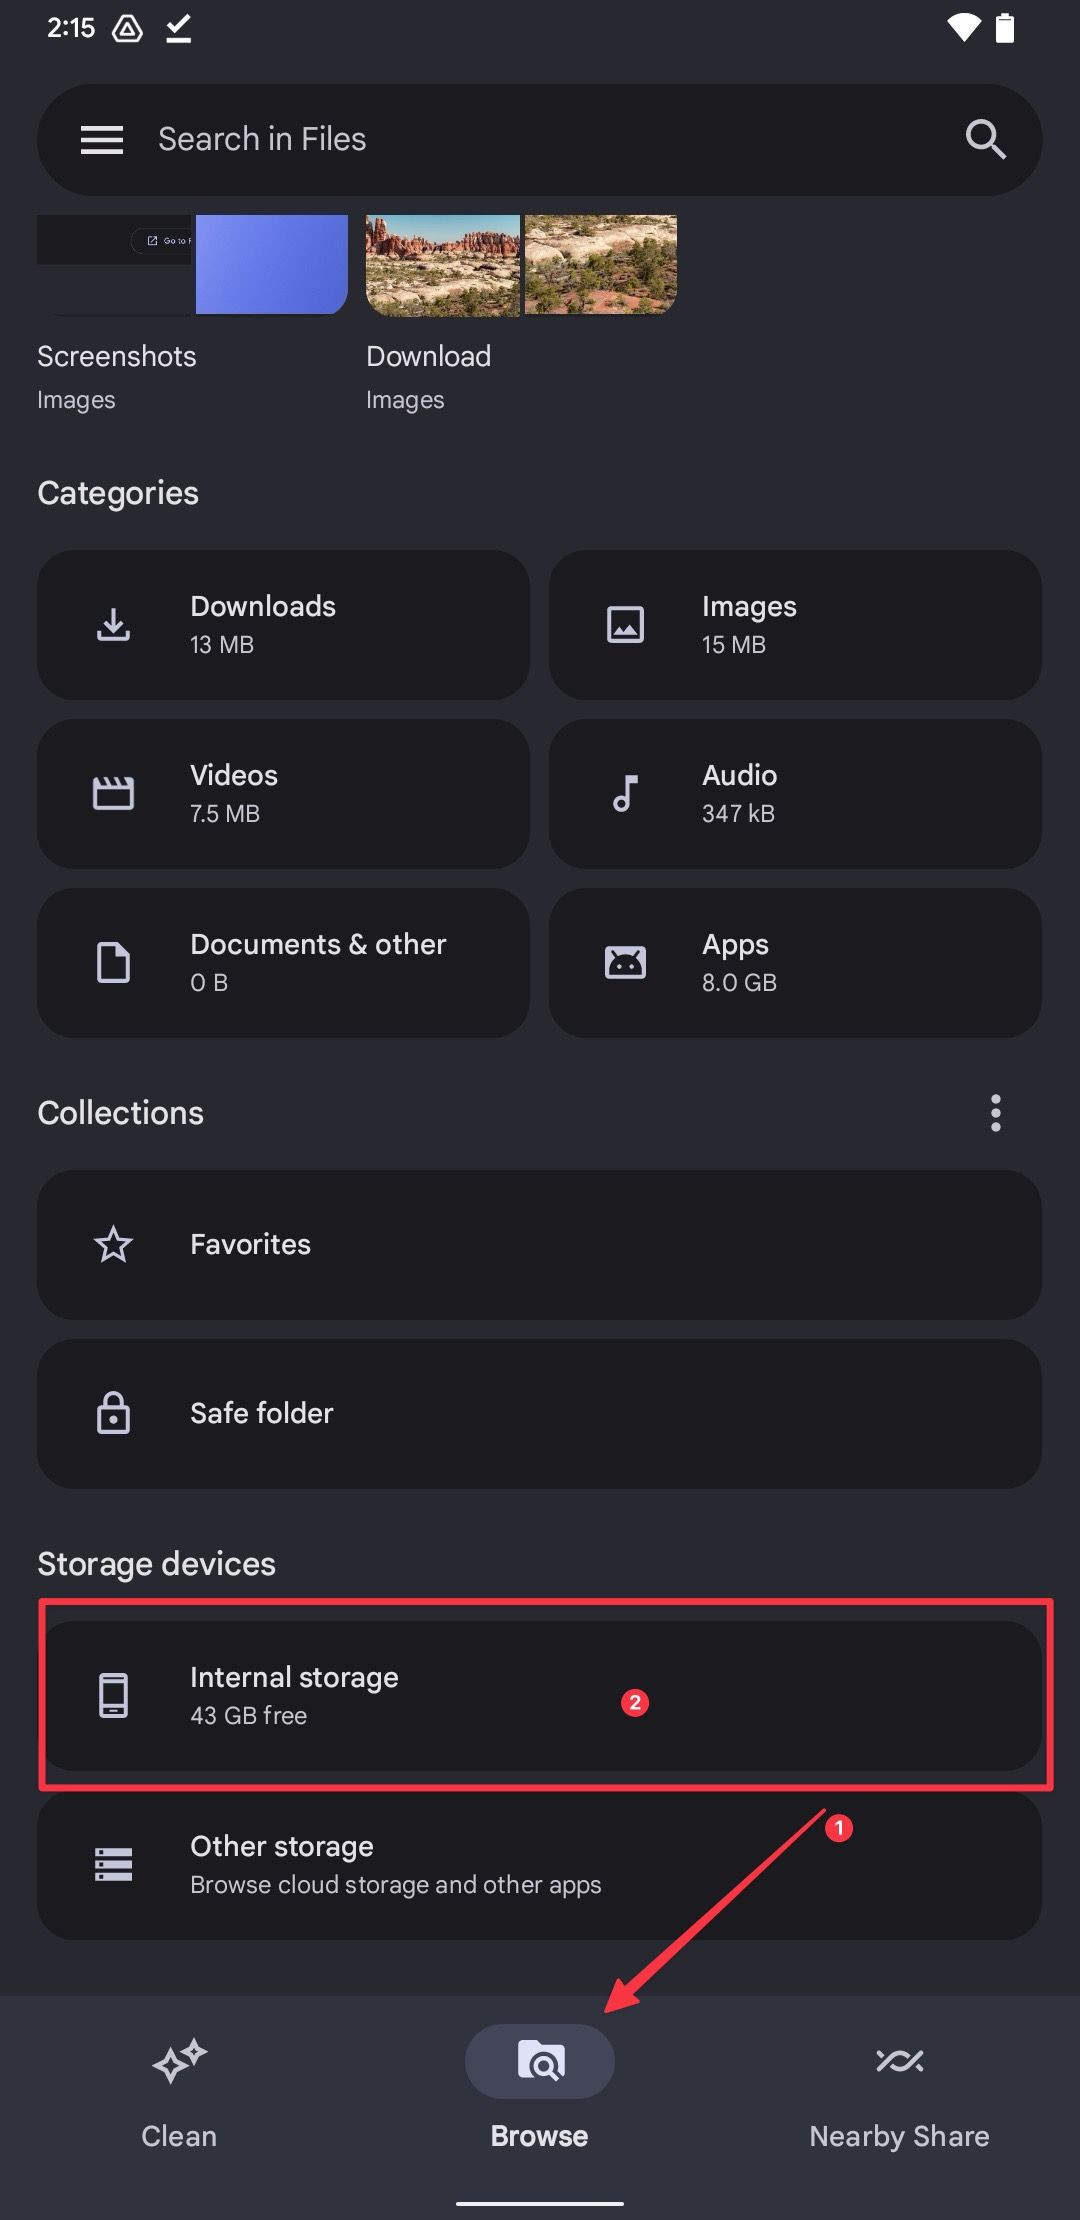 Files by Google home page screenshot showing internal storage option